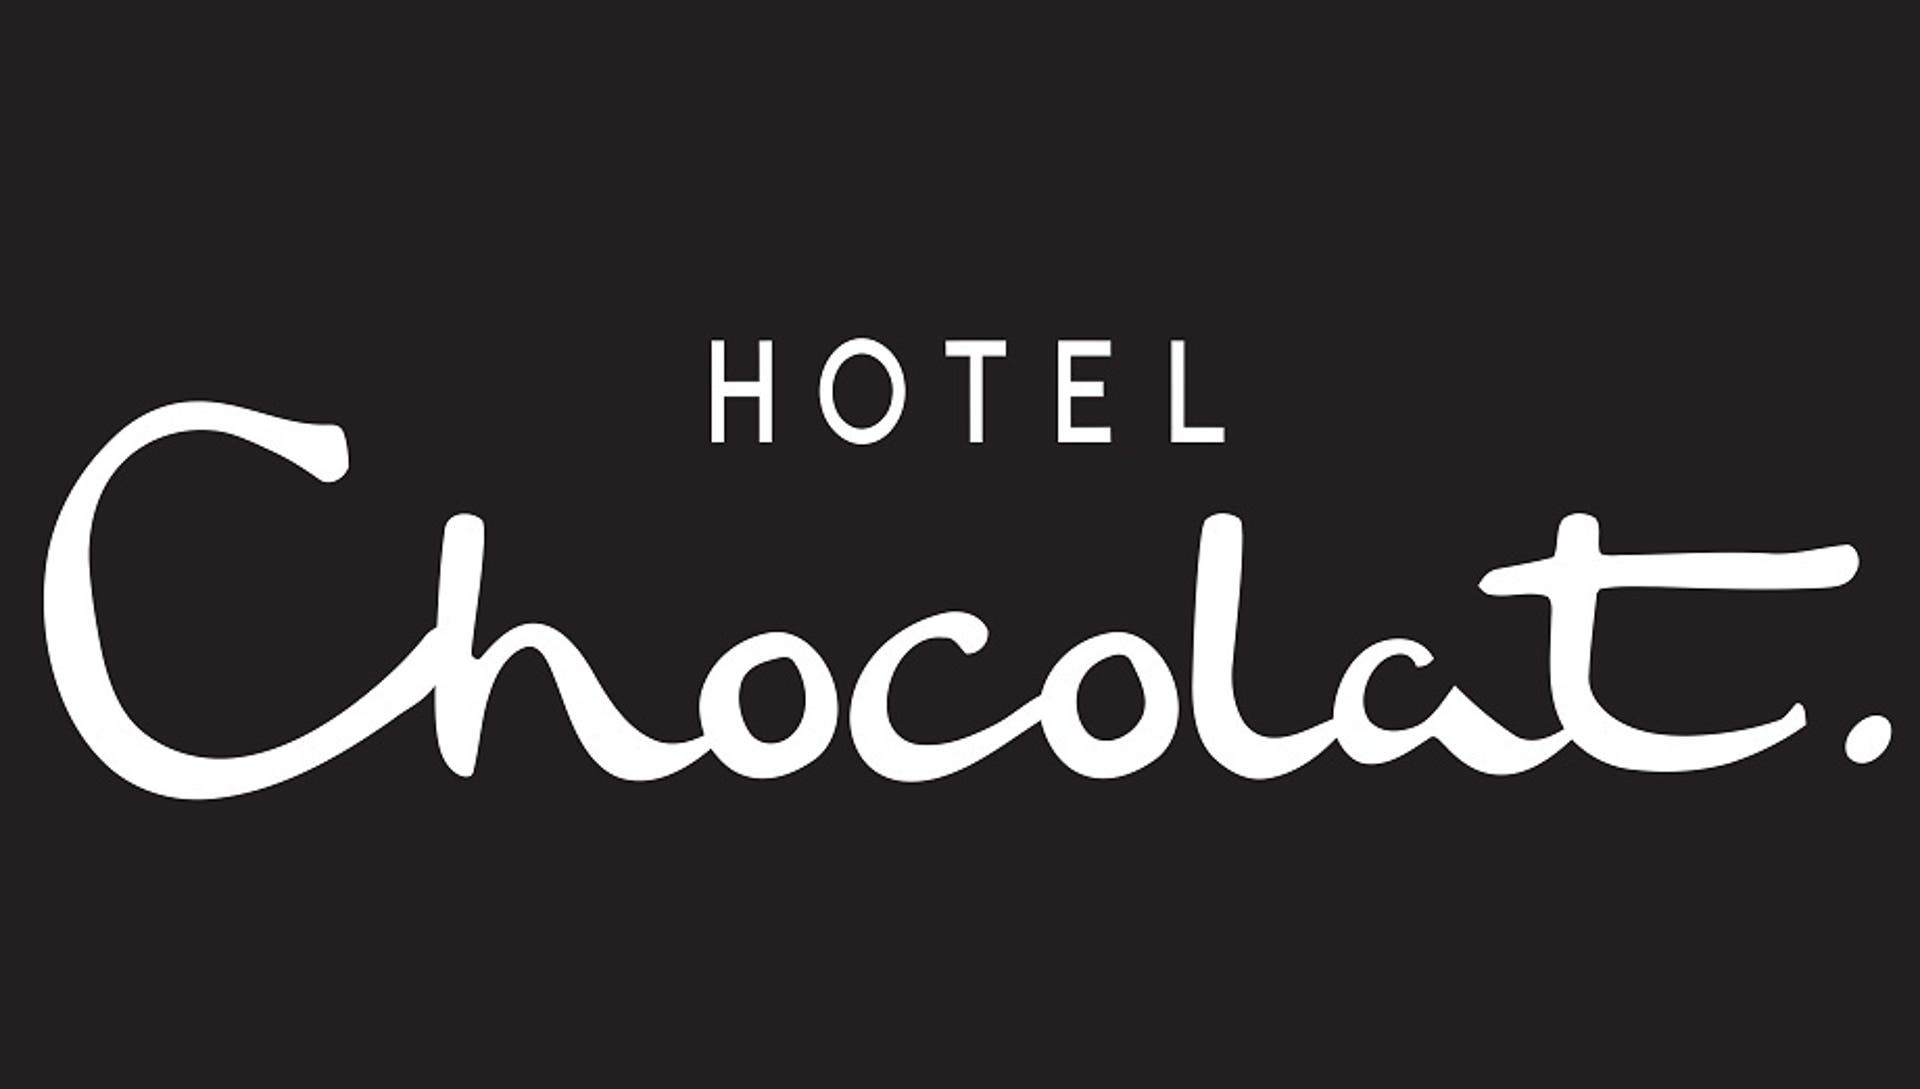  The Hotel Chocolat logo in white text on a black background. 